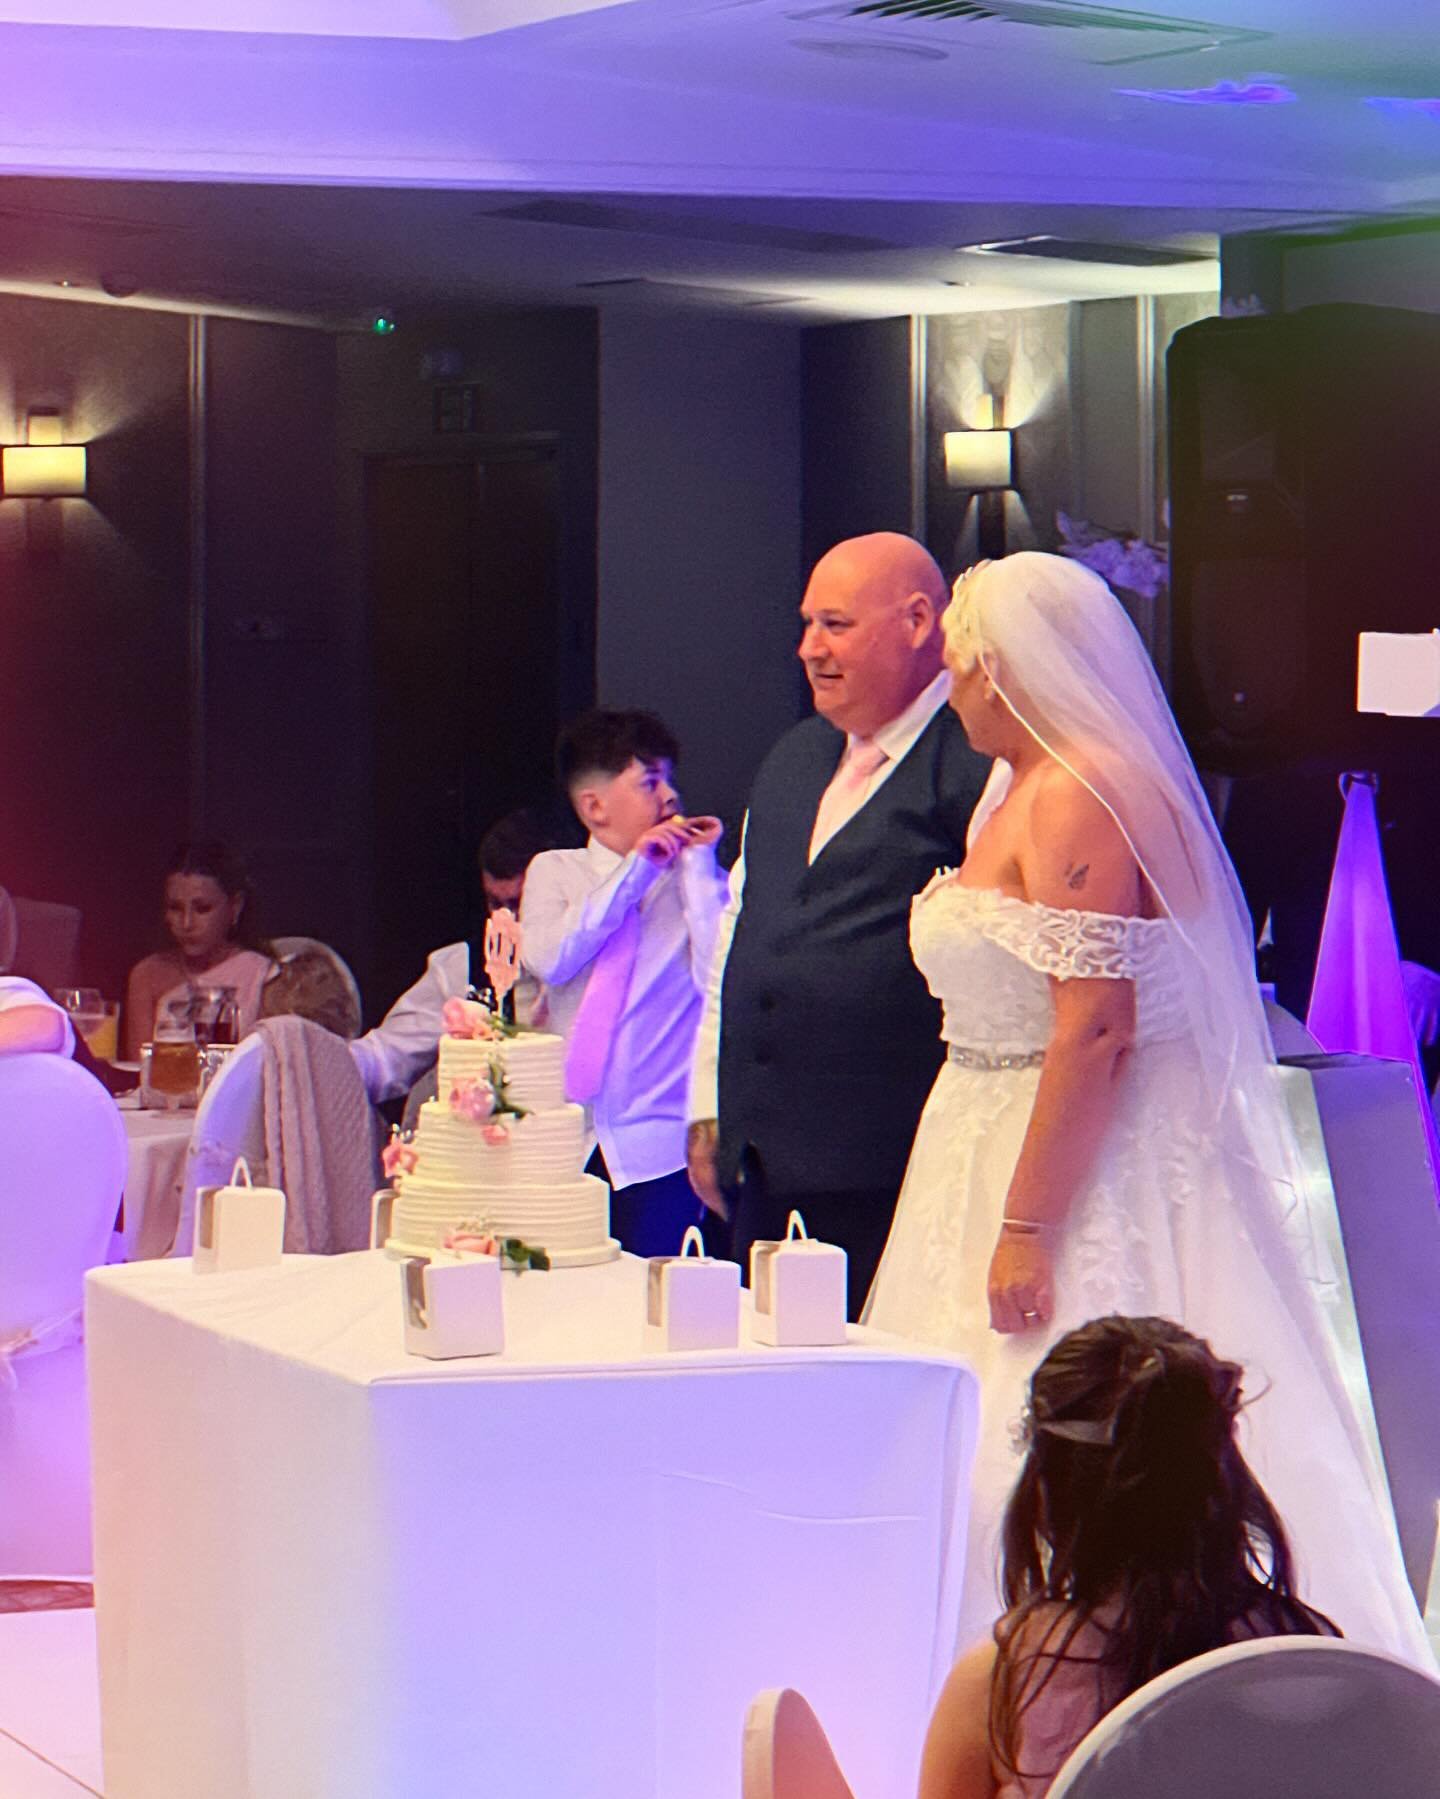 Sometimes when I&rsquo;m performing magic there are short gaps where certain announcements need to be made i.e. the cutting of the cake &amp; the first dance etc.

It&rsquo;s at these moments when I realise how lucky I am to be part of a couple&rsquo